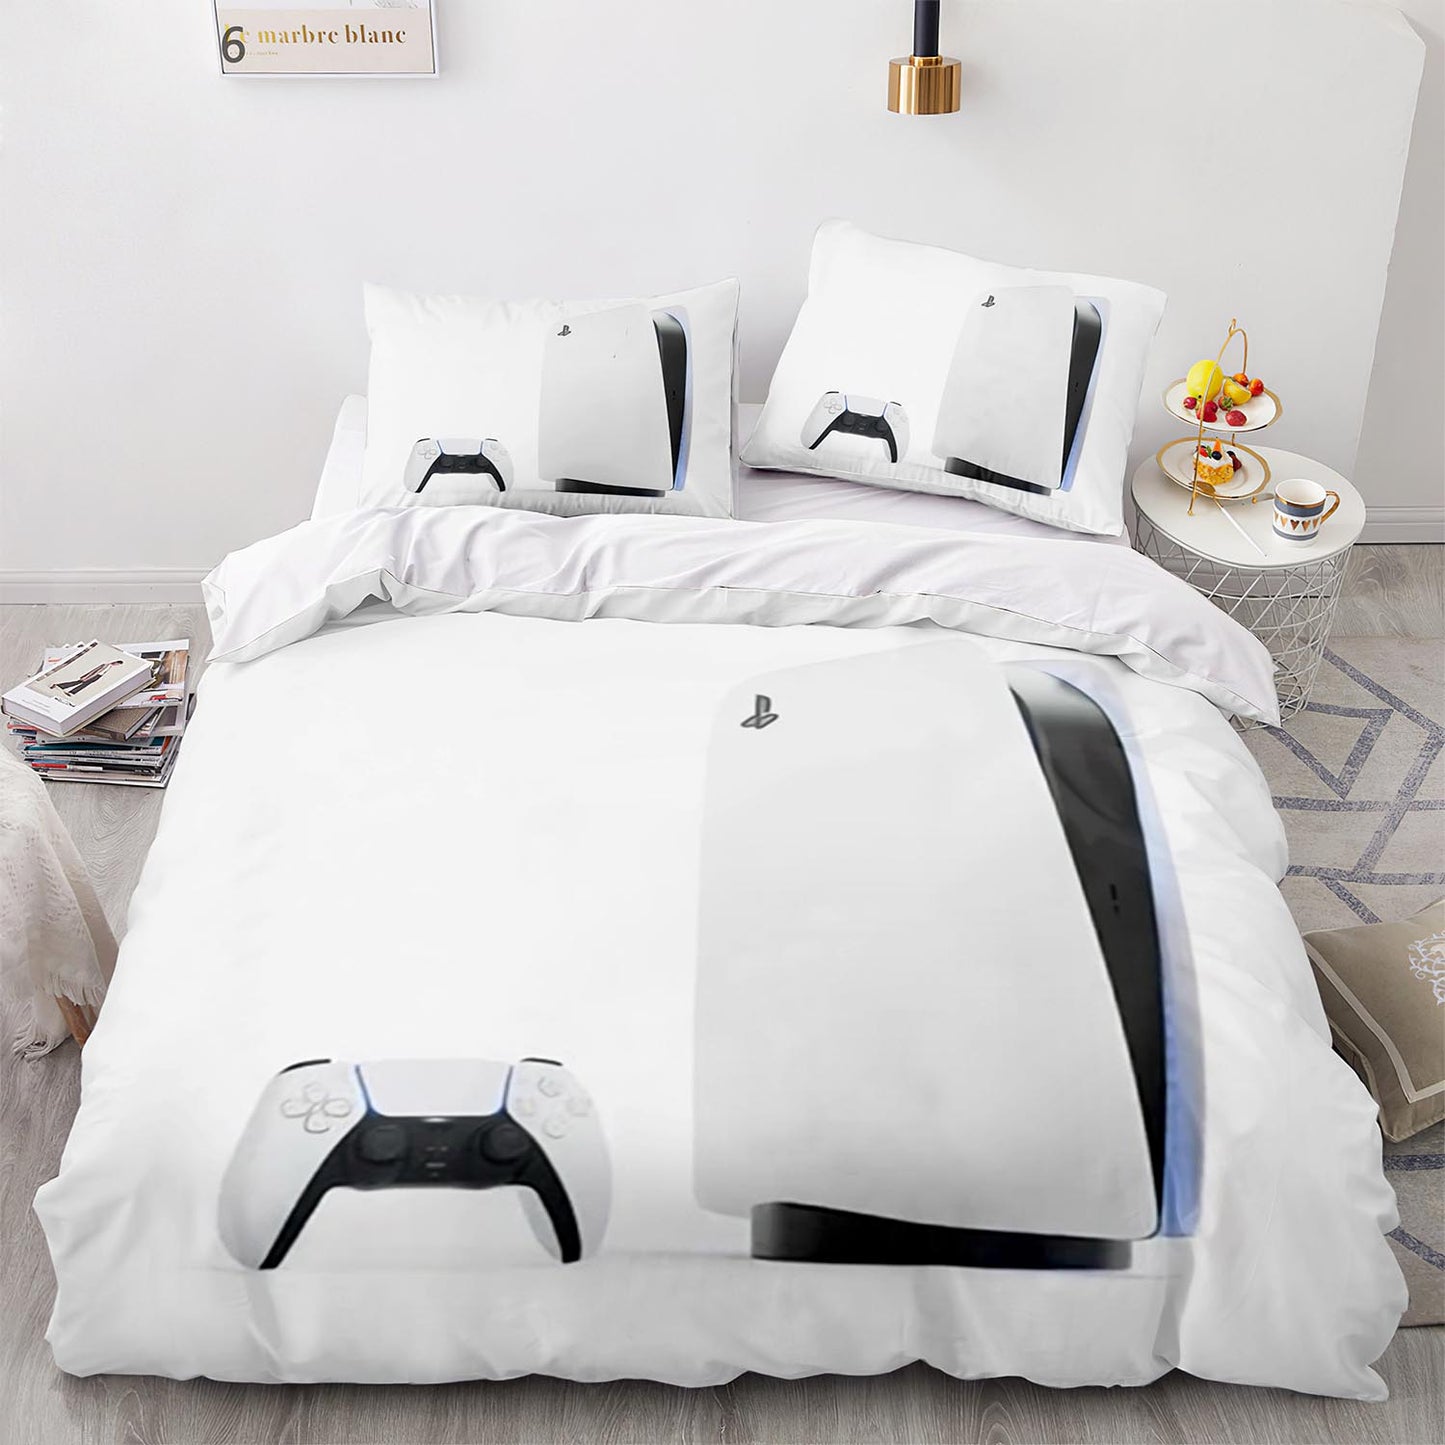 Customize Photo Logo Duvet Cover Boys Girls Adults Gift Custom Made DIY Bedding Set Designer Bed Set Queen Size Quilt Cover  PS1005